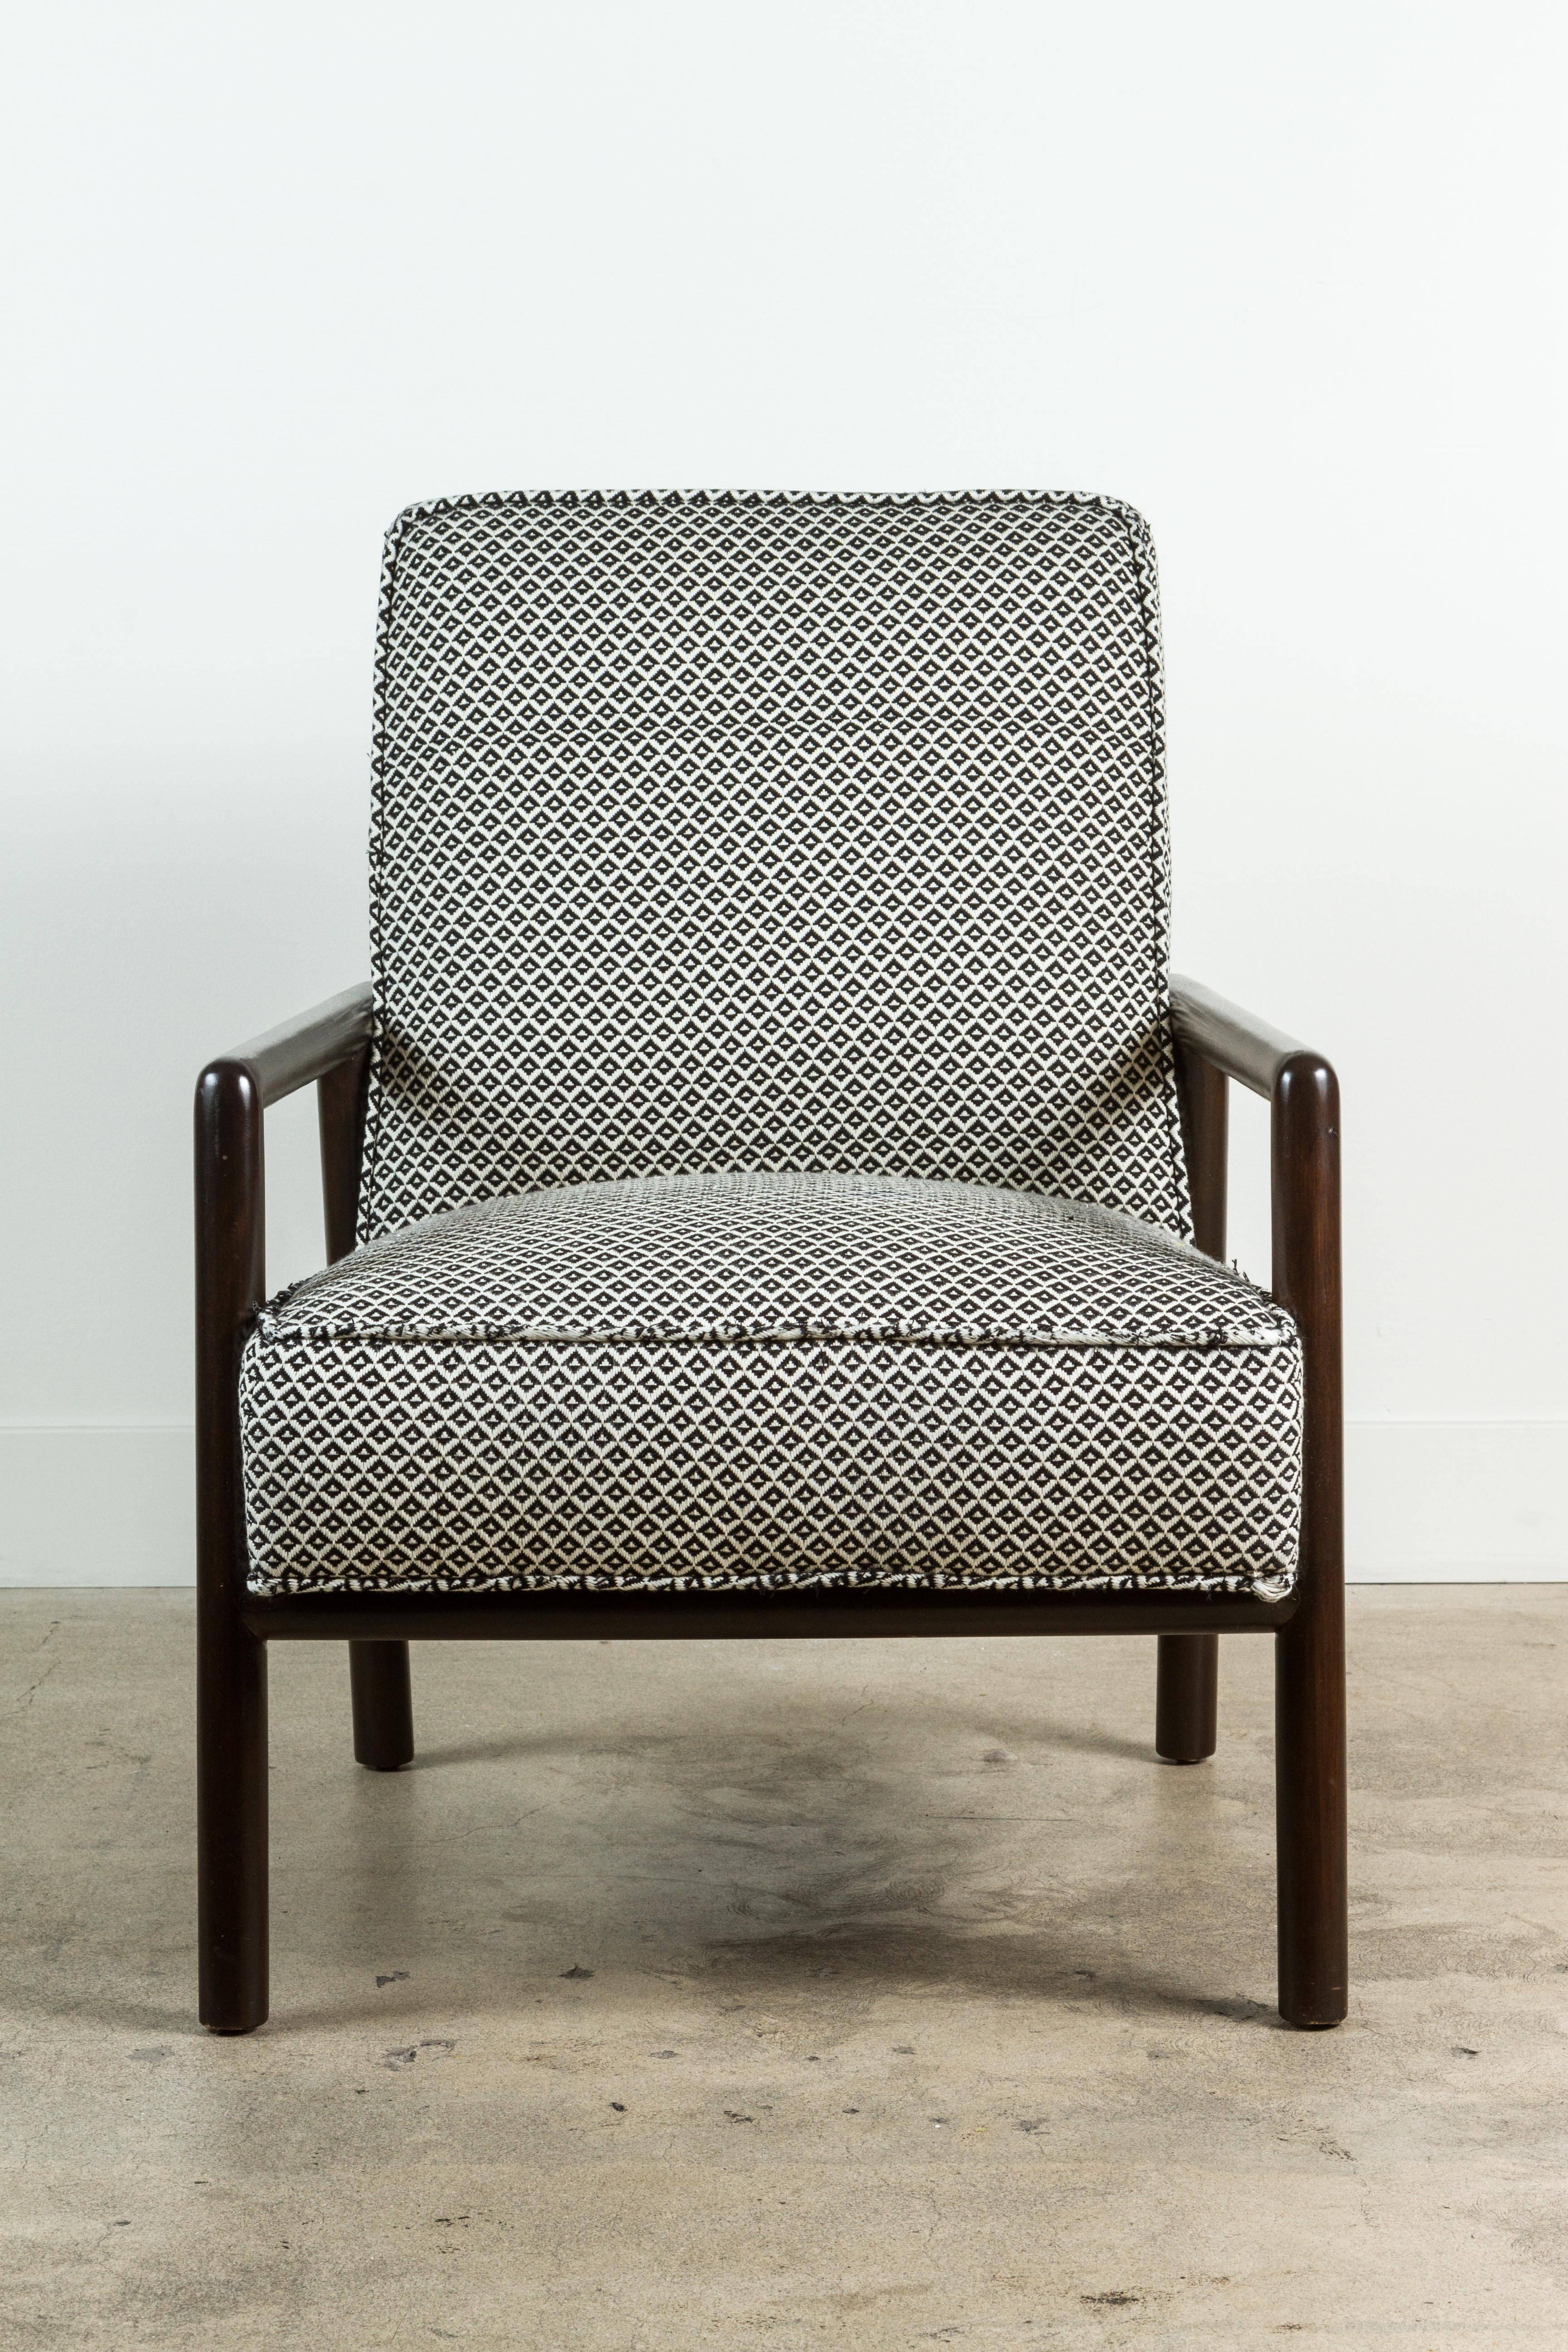 Vintage armchair by Russel Wright.